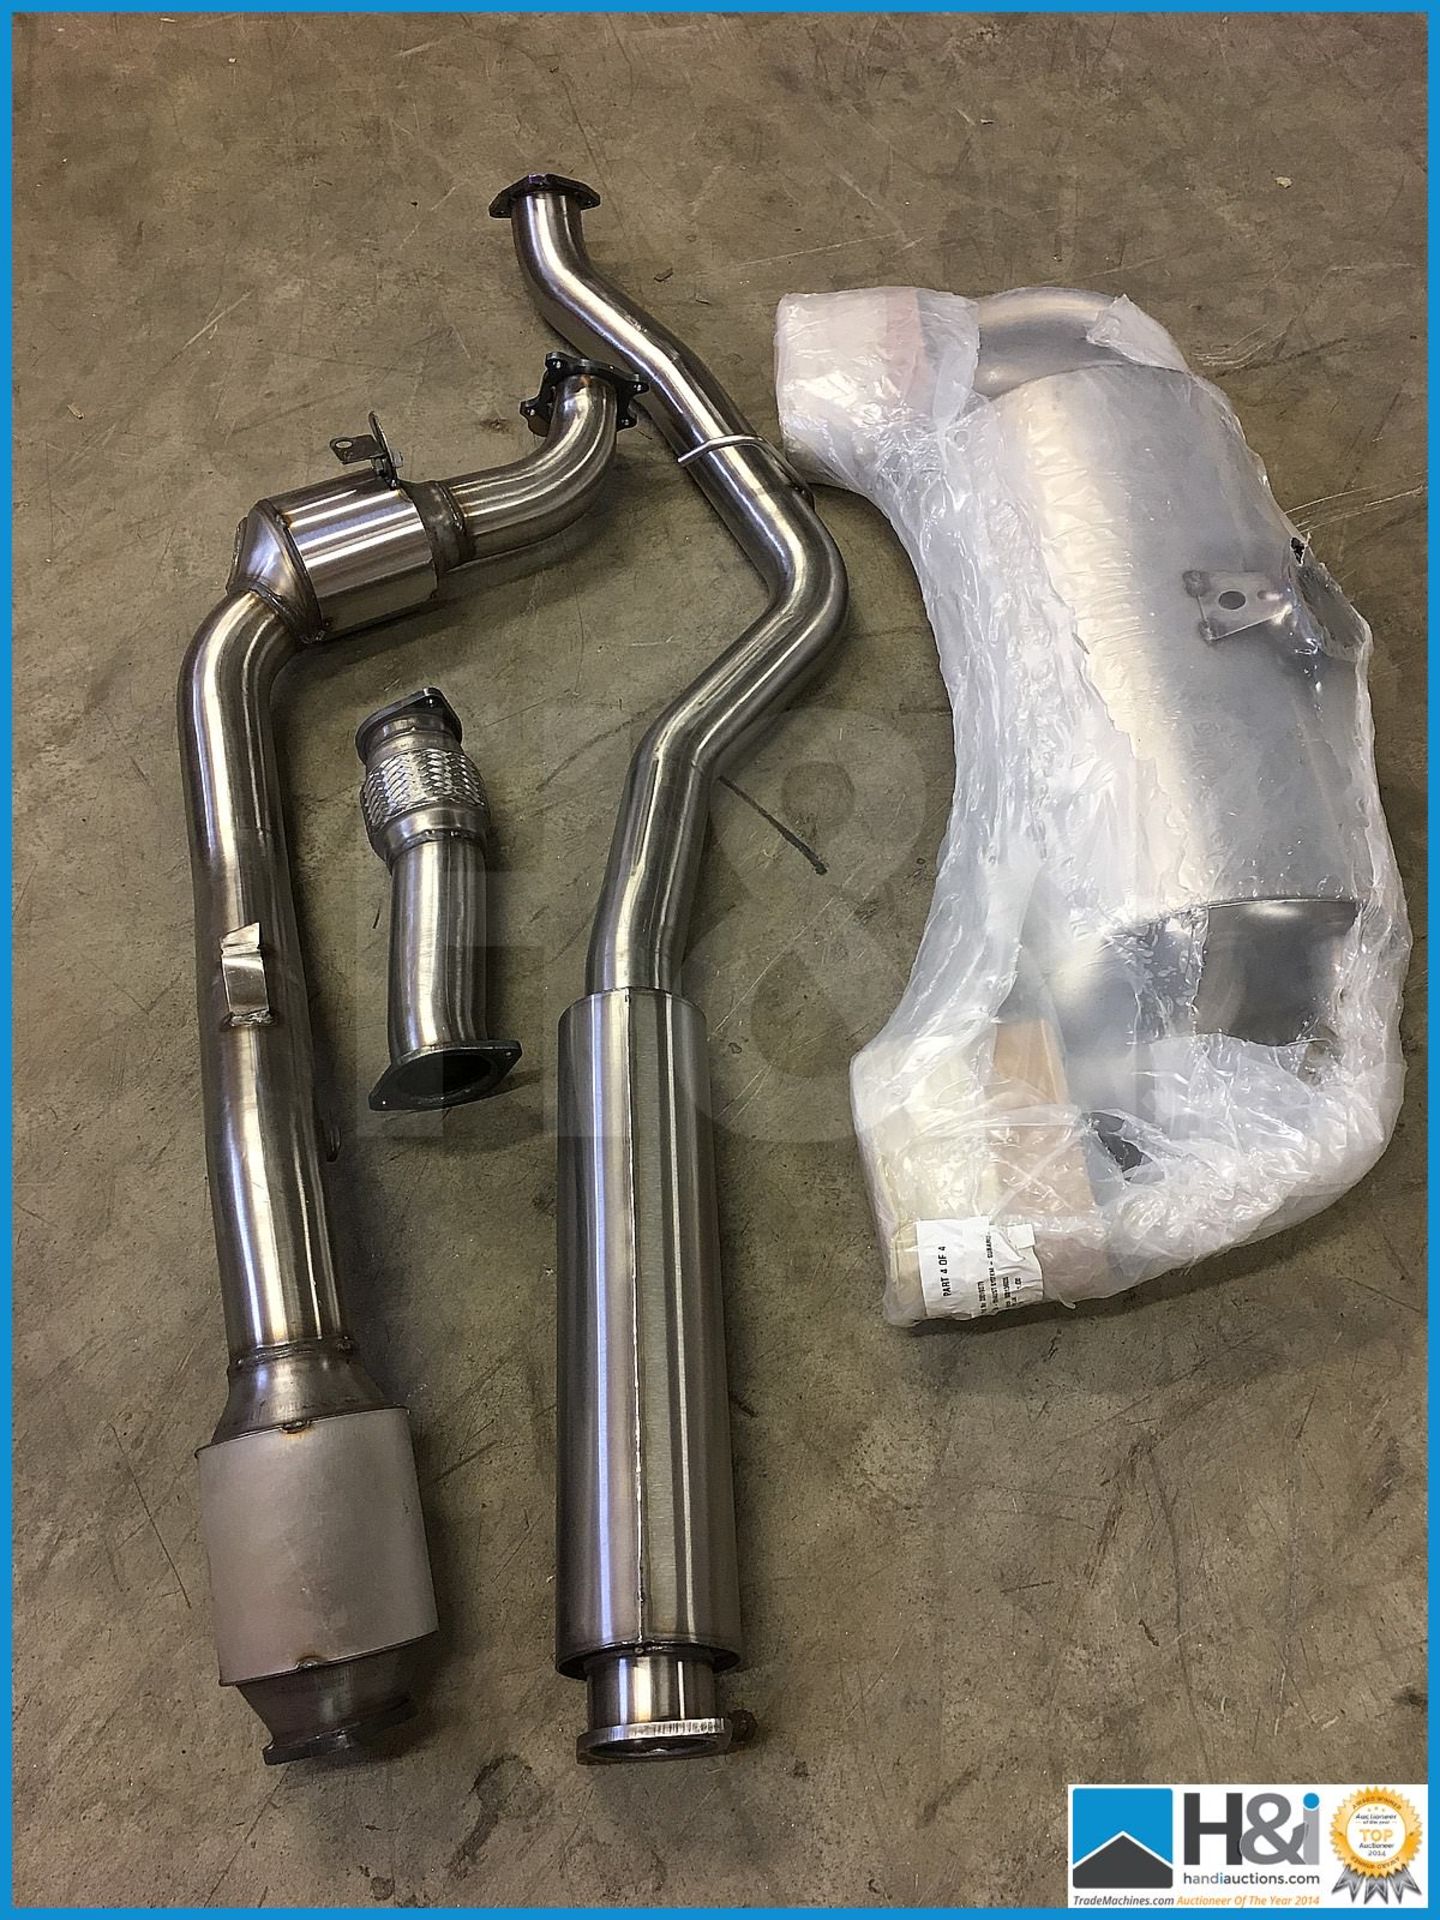 Subaru Cosworth CS400 compete exhaust system. This is only one of 8 systems available in the world.